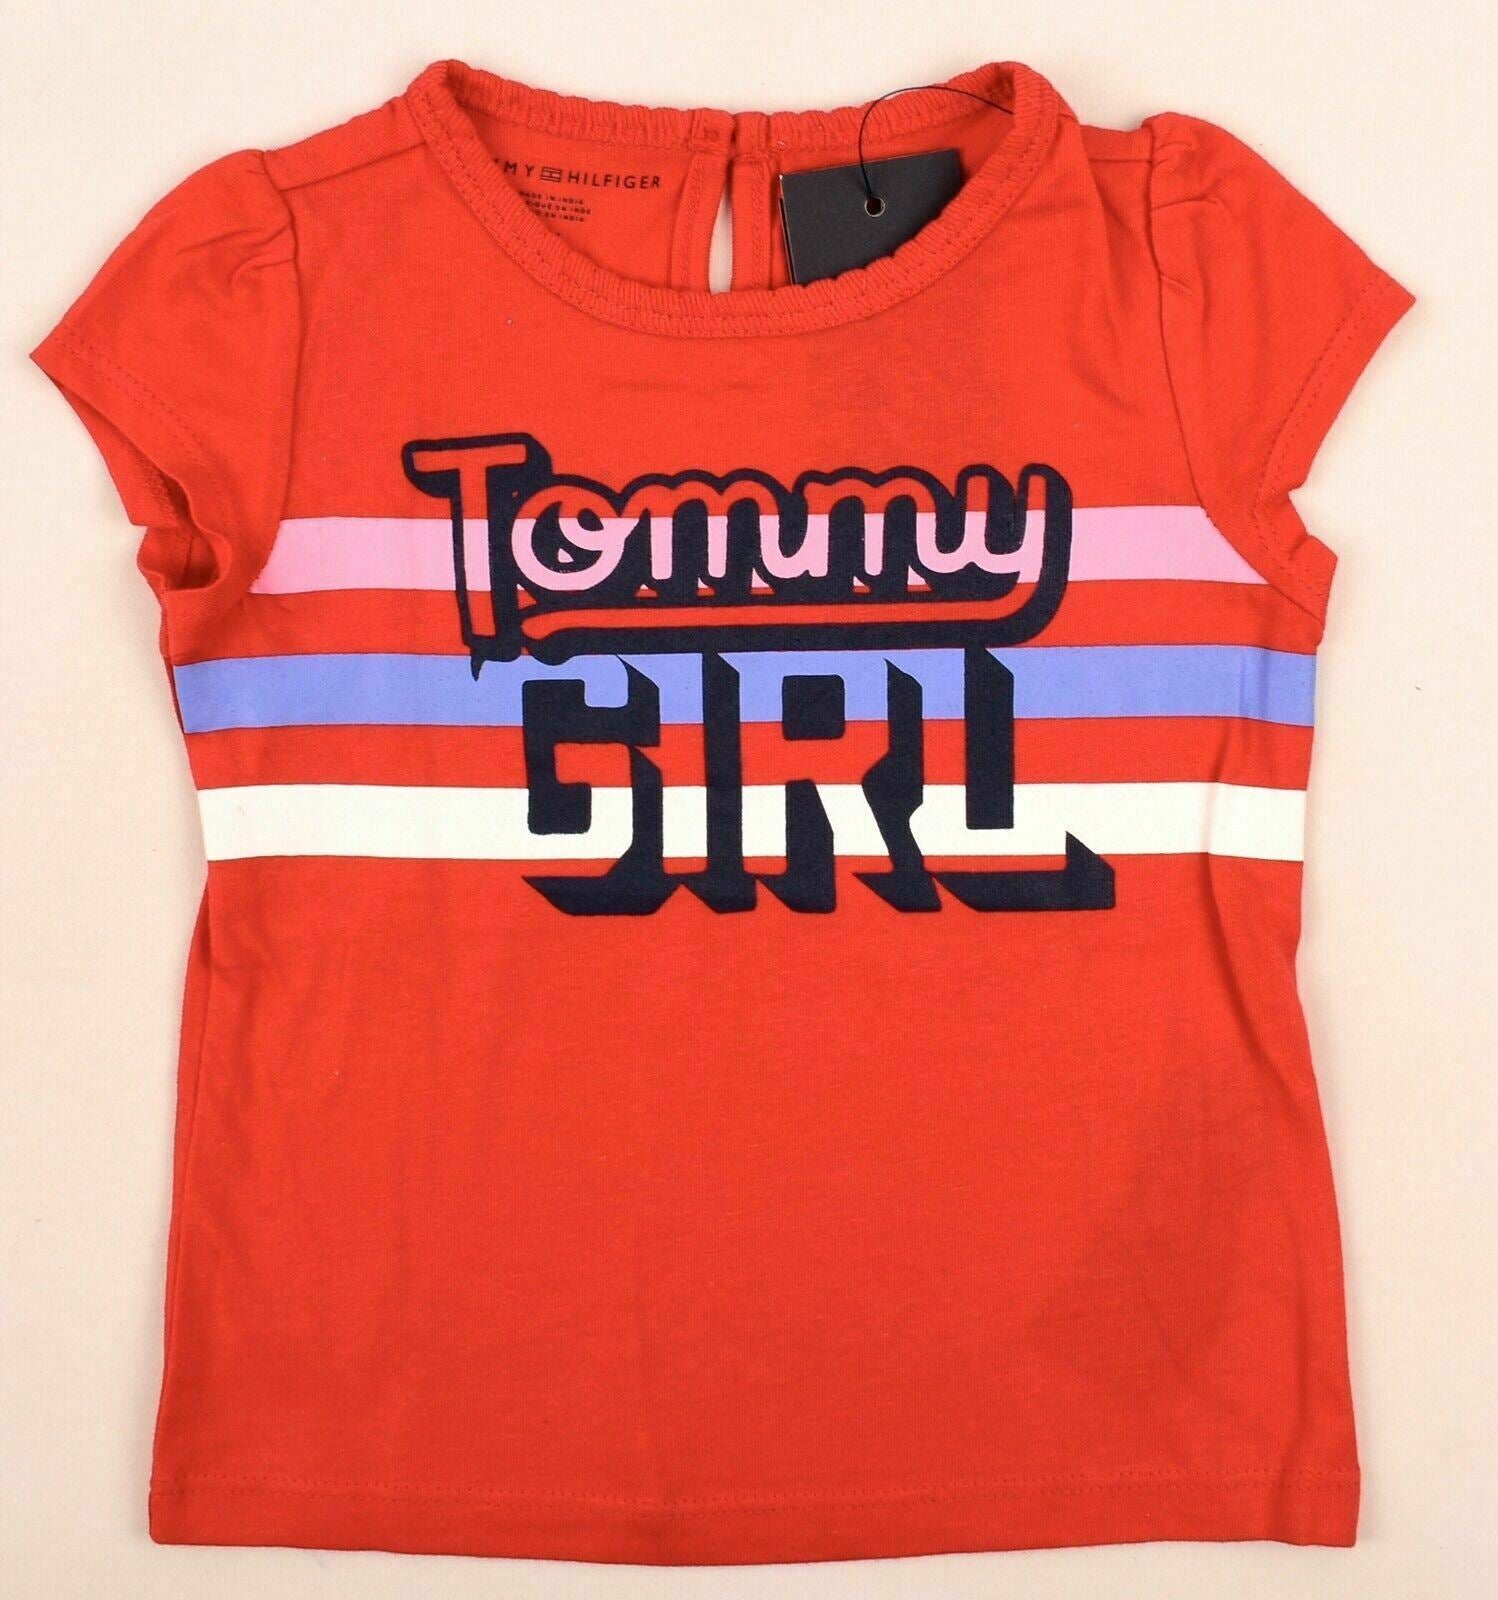 TOMMY HILFIGER Baby Girls' TOMMY GIRL Red Top, size 12 months